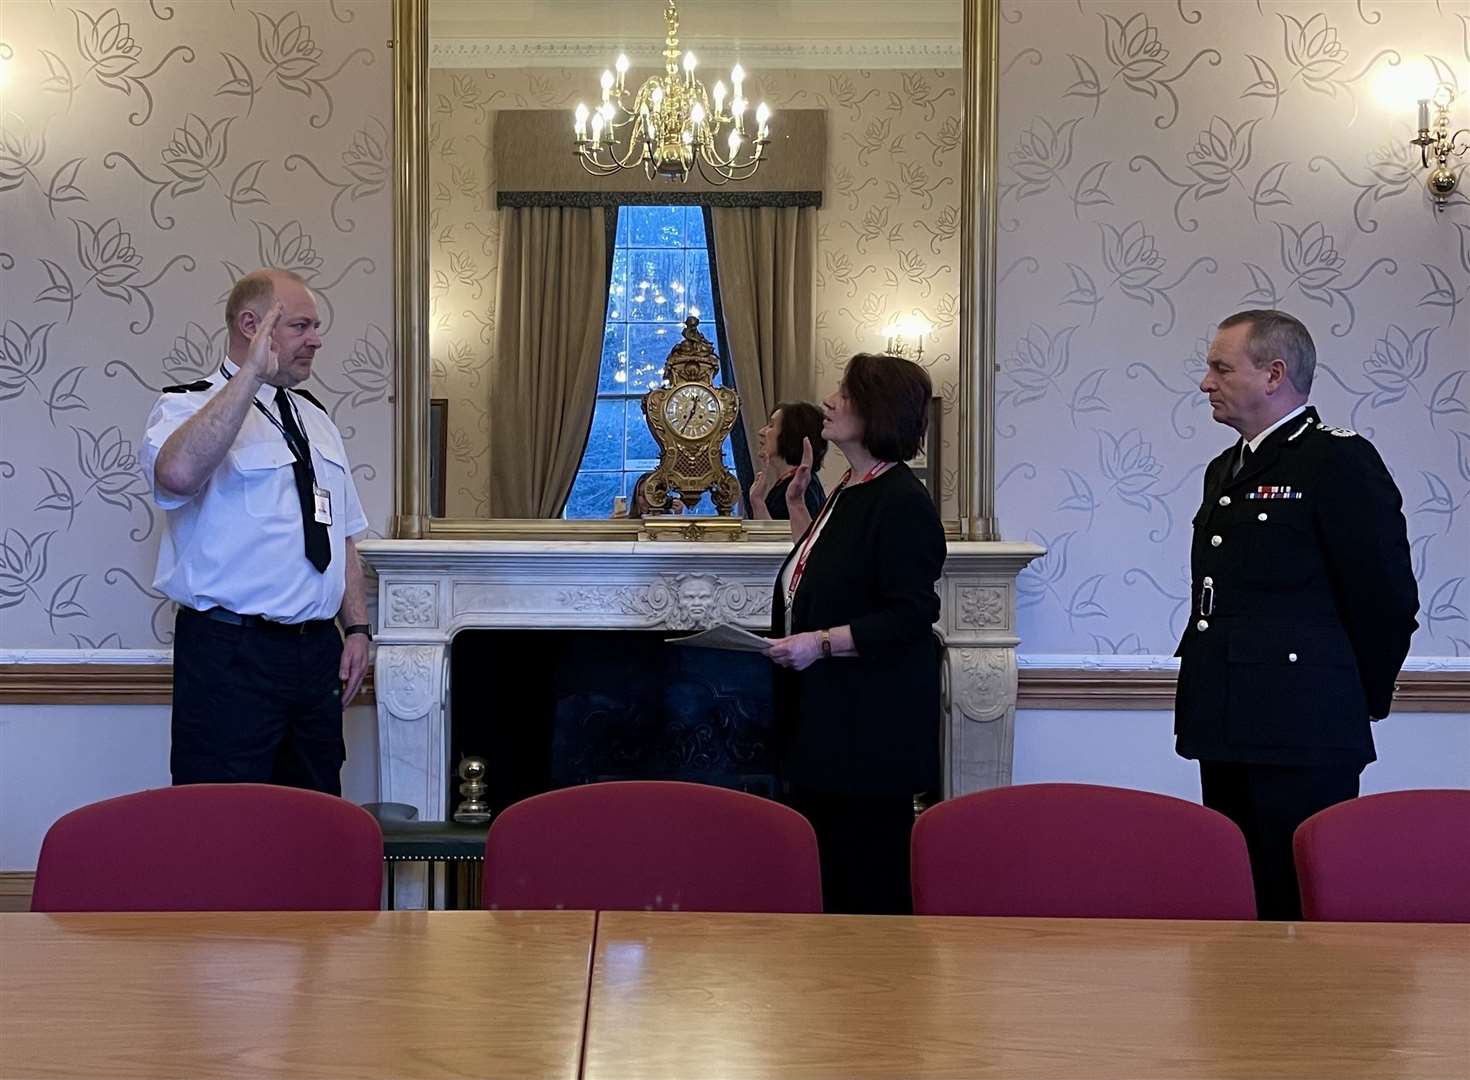 Chief Supt Robert Shepherd (left) was sworn in earlier this year by Justice of the Peace Gillian Thomson and Chief Constable Sir Iain Livingstone.